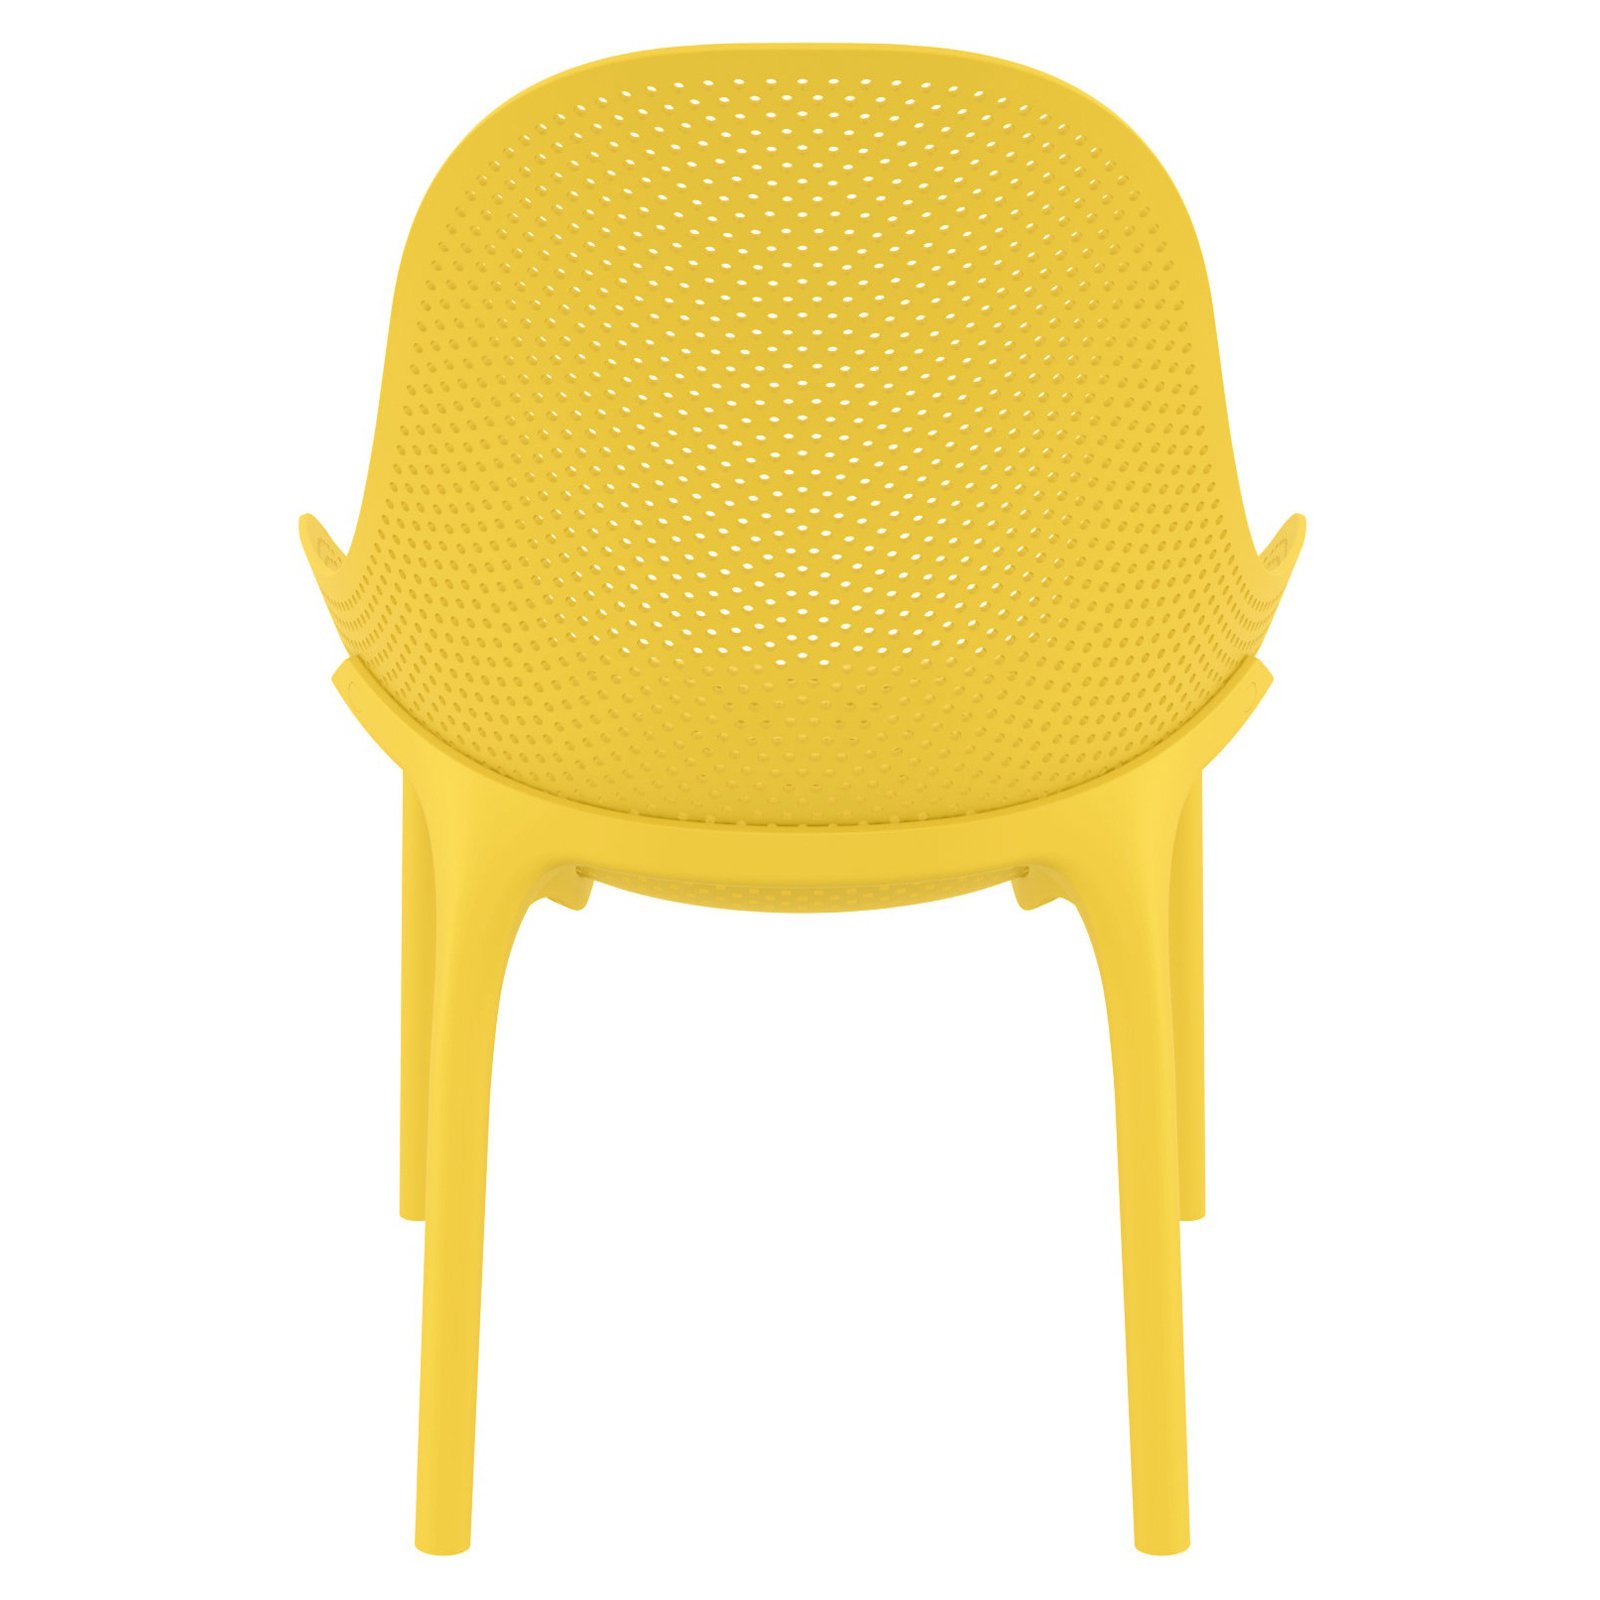 Compamia Sky Patio Chair in Yellow - image 5 of 11